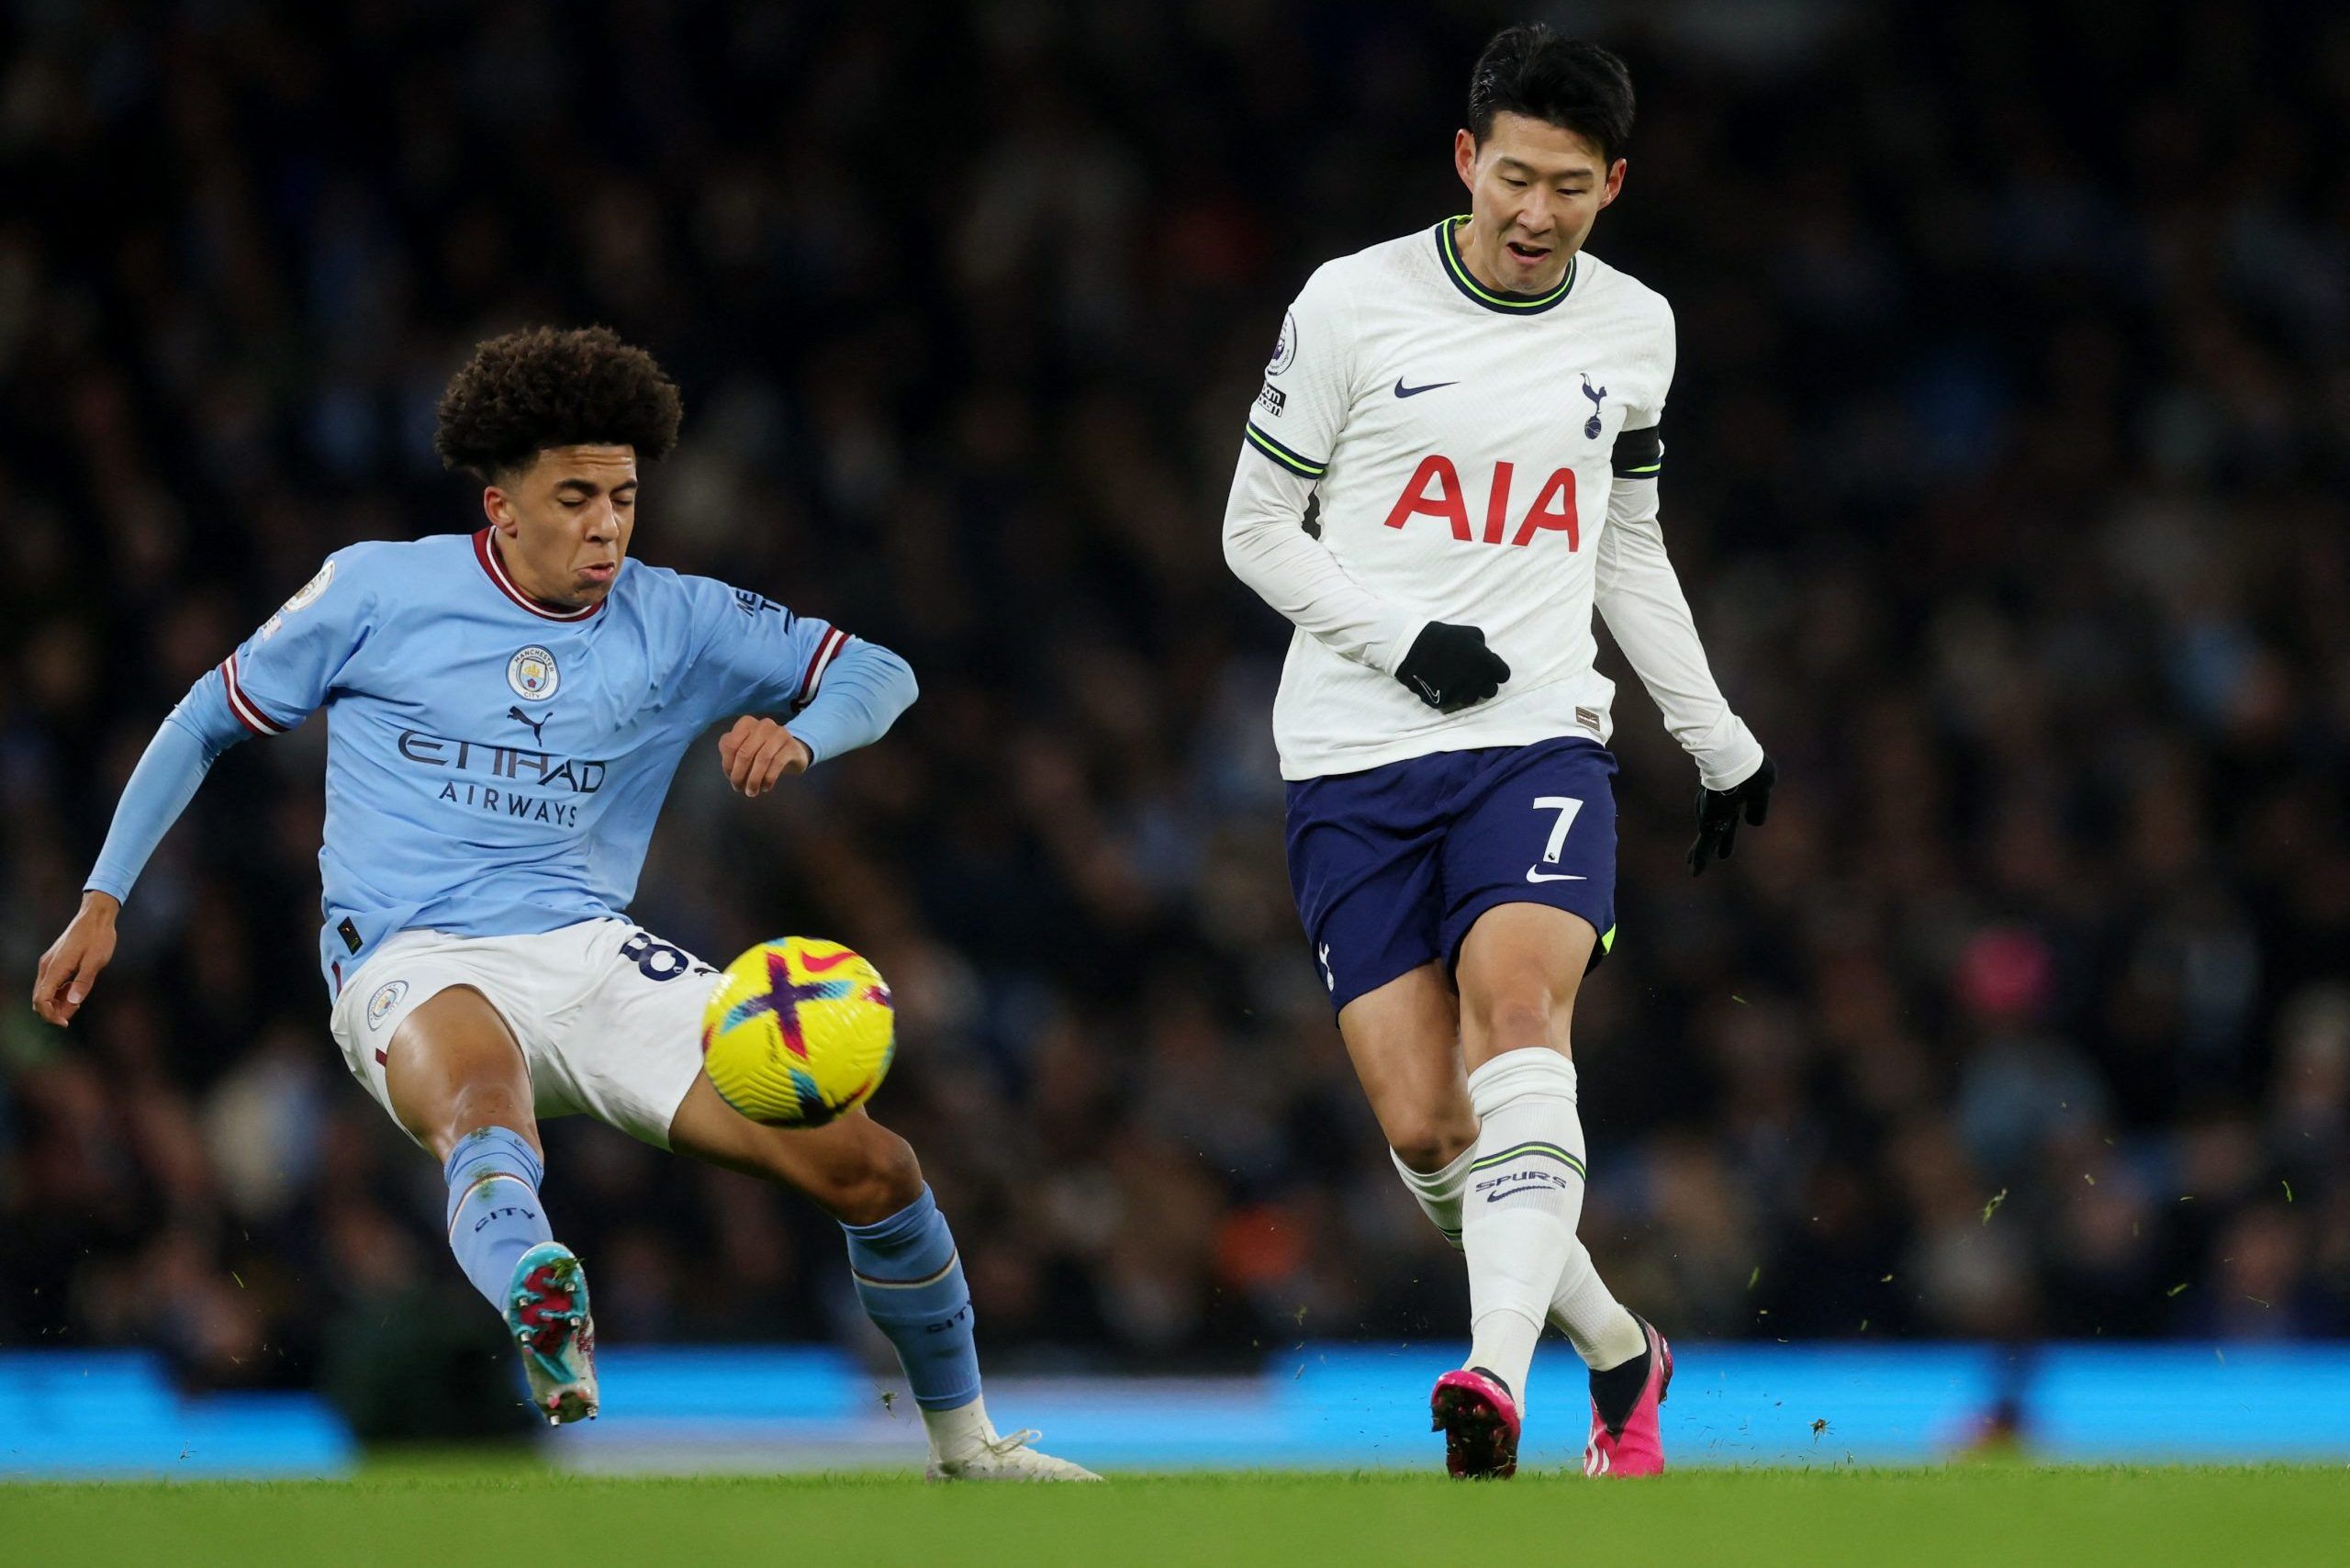 Soccer Football - Premier League - Manchester City v Tottenham Hotspur - Etihad Stadium, Manchester, Britain - January 19, 2023 Manchester City's Rico Lewis in action with Tottenham Hotspur's Son Heung-min Action Images via Reuters/Lee Smith EDITORIAL USE ONLY. No use with unauthorized audio, video, data, fixture lists, club/league logos or 'live' services. Online in-match use limited to 75 images, no video emulation. No use in betting, games or single club /league/player publications.  Please c